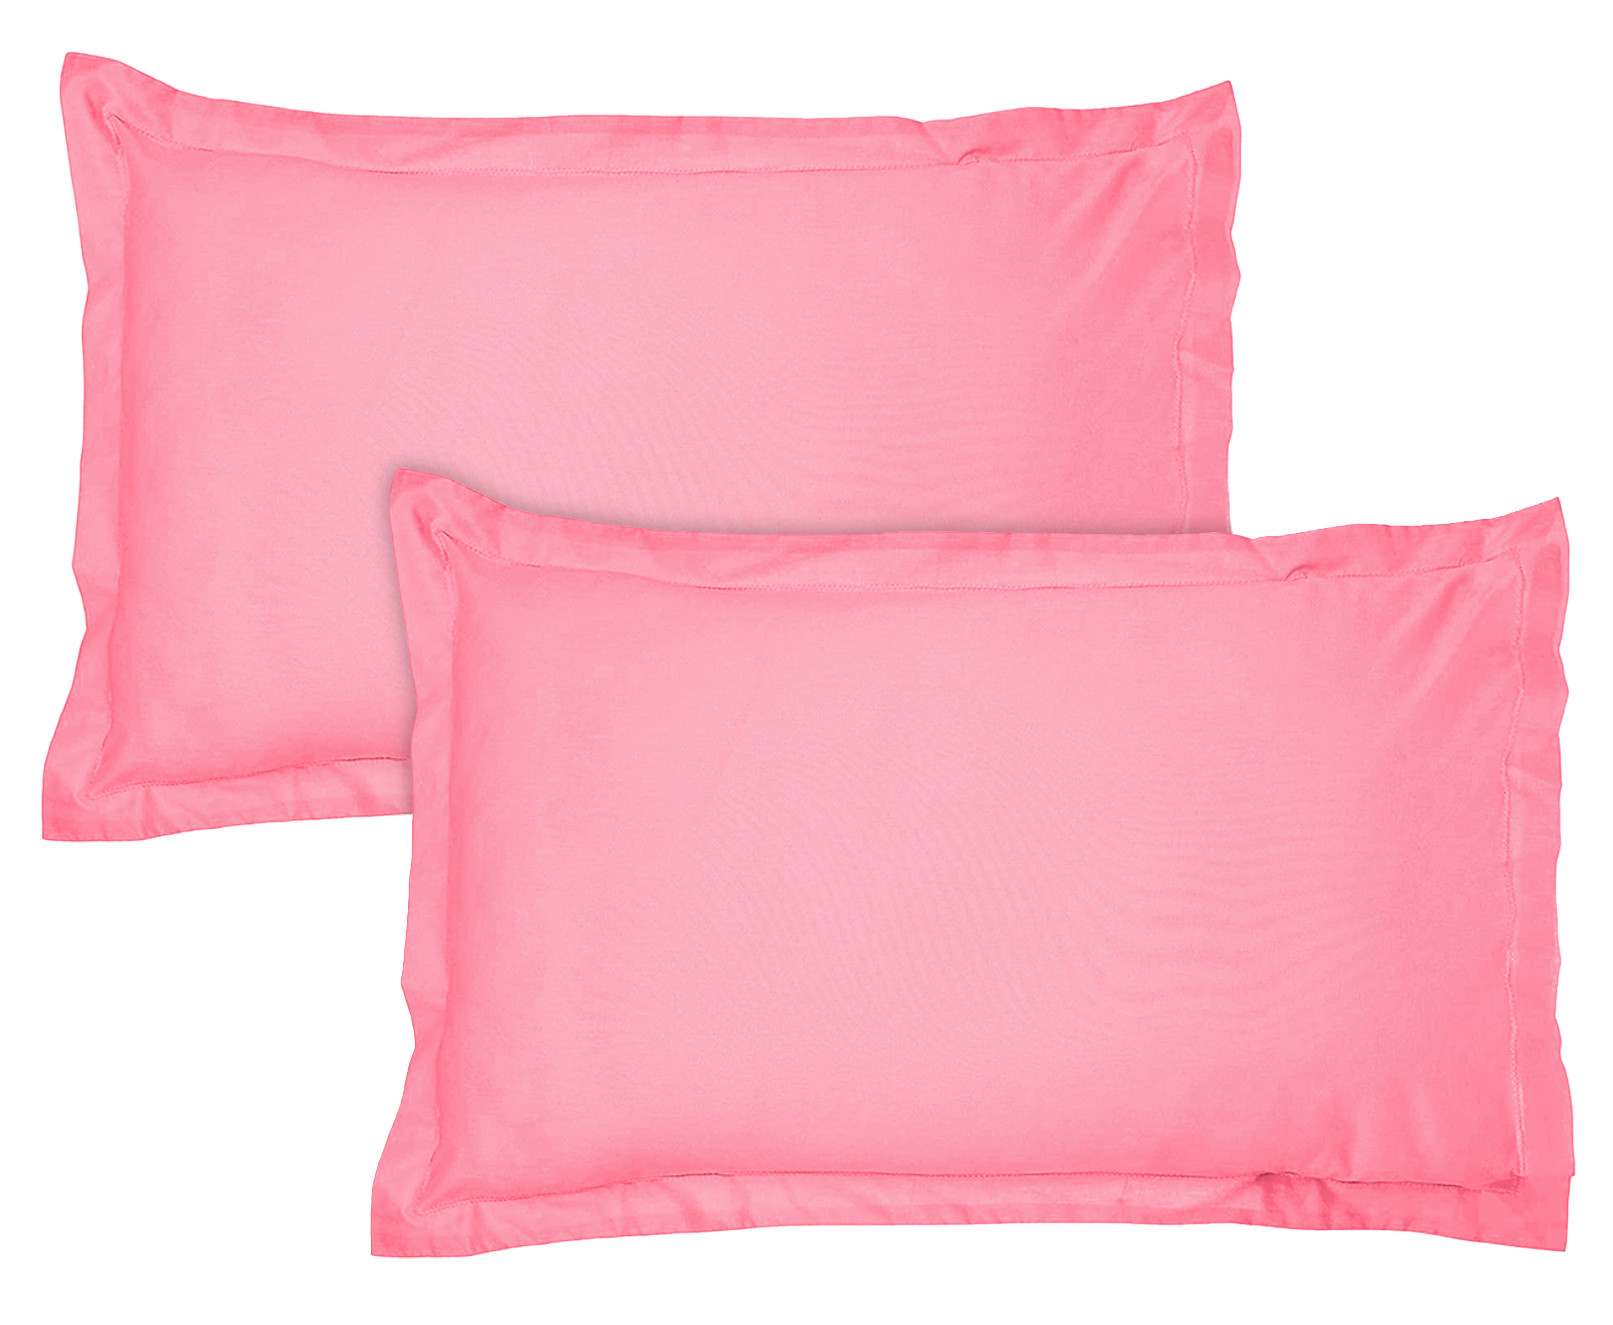 Kuber Industries Breathable & Soft Cotton Pillow Cover For Sofa, Couch, Bed - 29x20 Inch,(Pink)